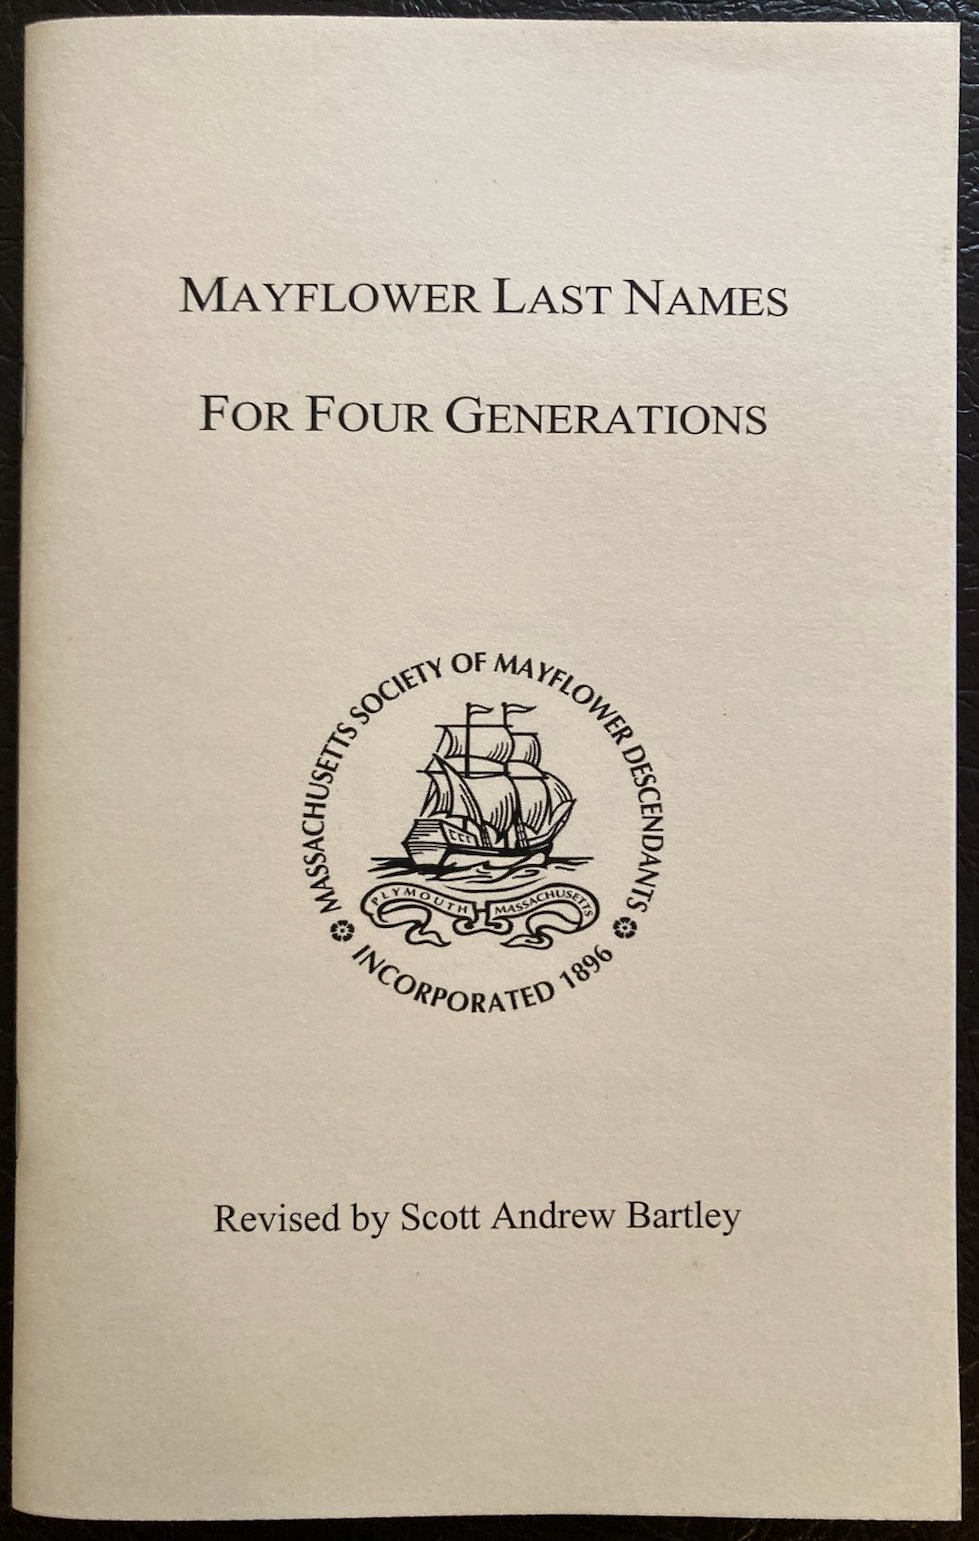 Mayflower Last Names for Four Generations